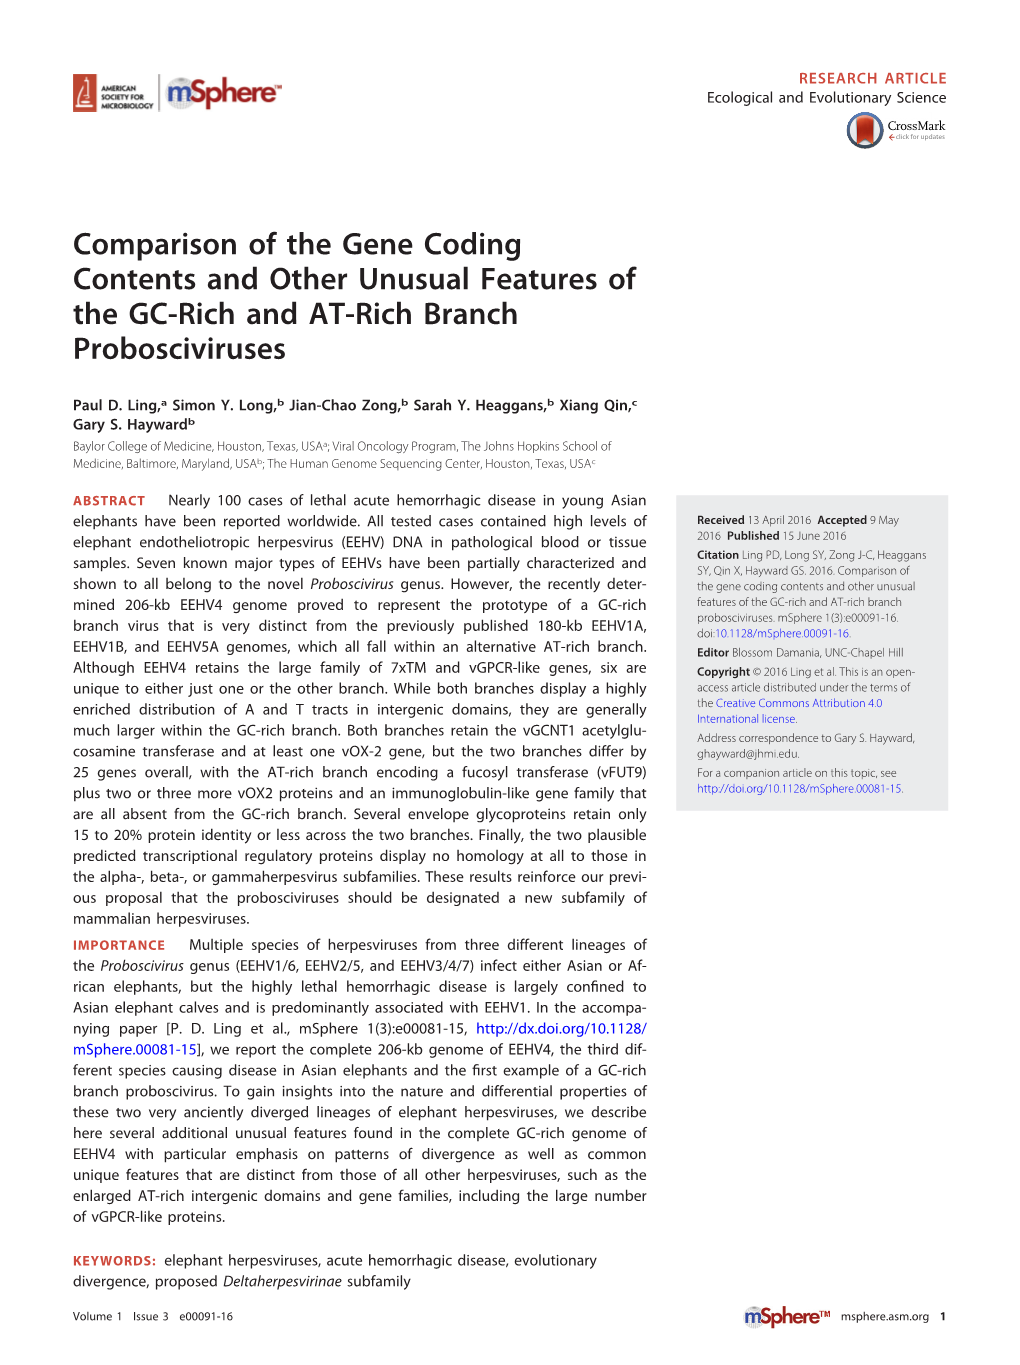 Comparison of the Gene Coding Contents and Other Unusual Features of the GC-Rich and AT-Rich Branch Probosciviruses